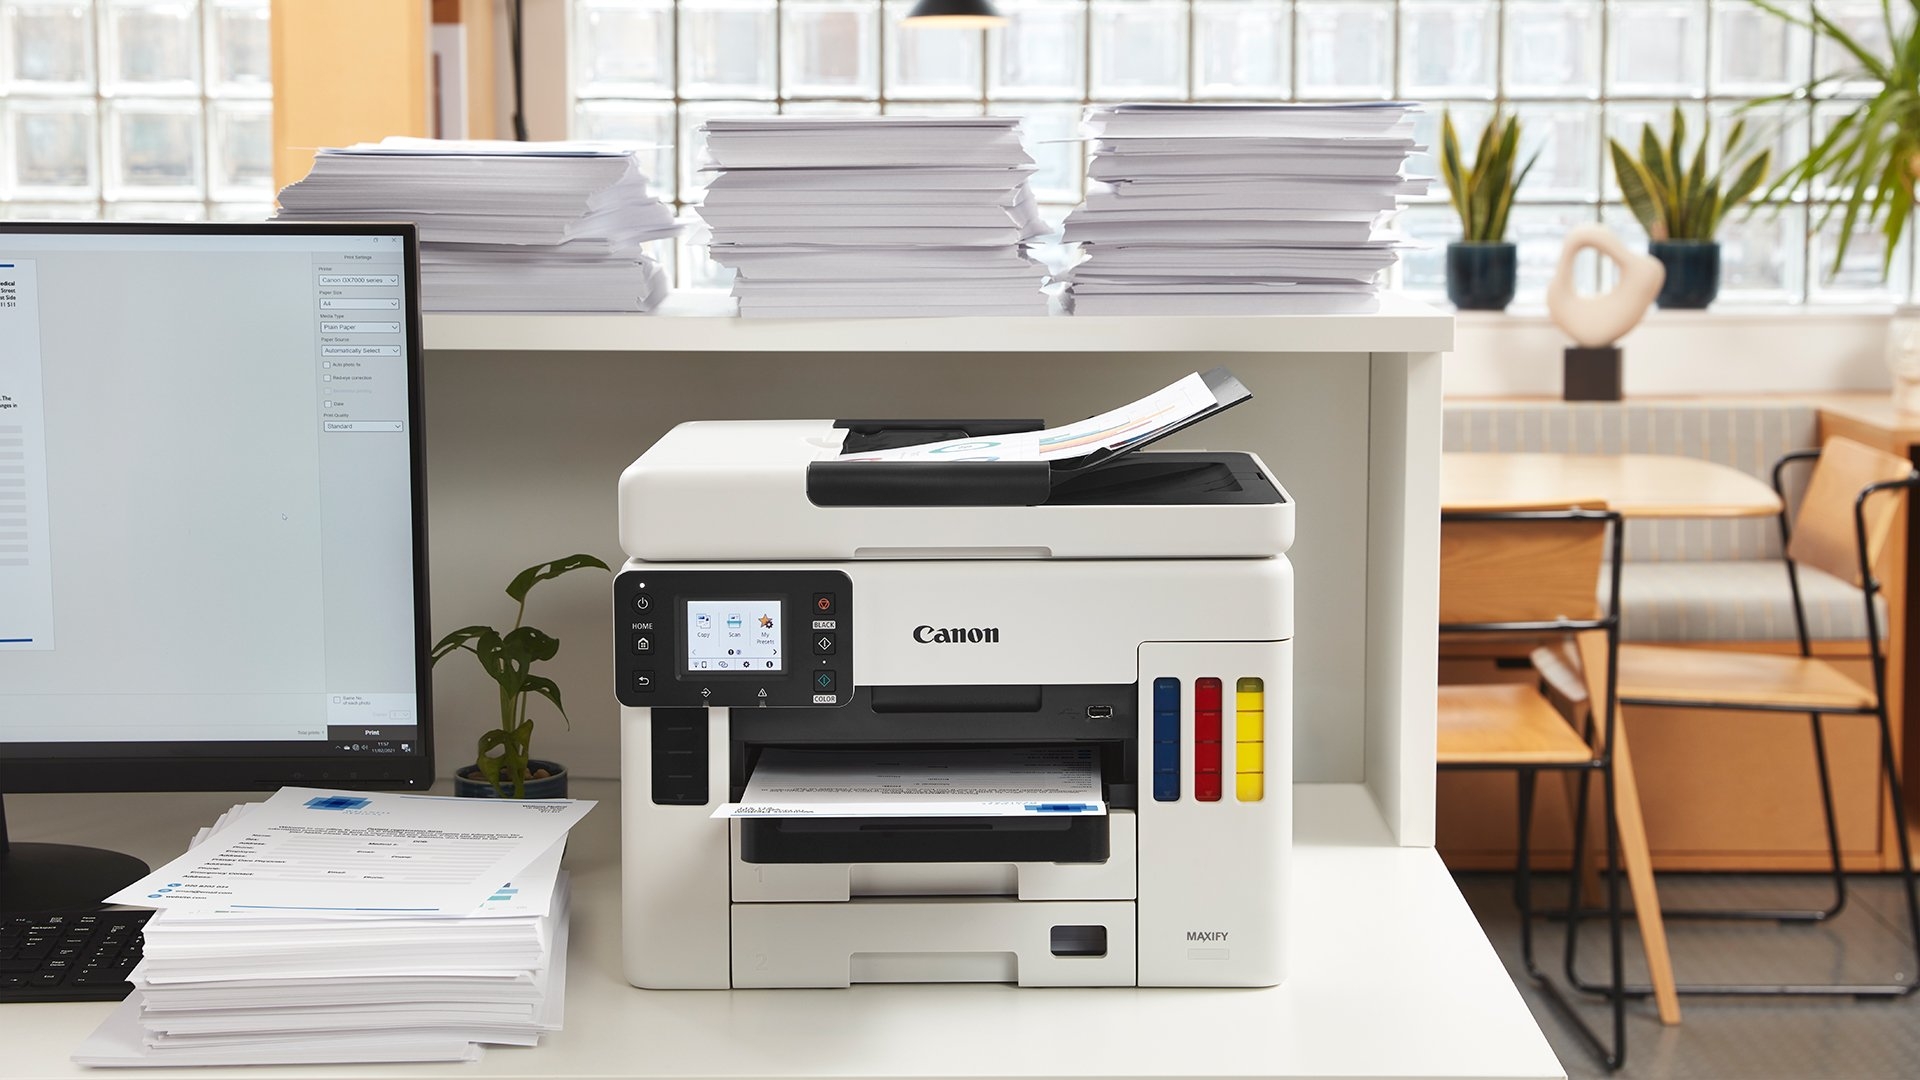 How to Install Canon MAXIFY Printer in Linux Mint 20 - Featured